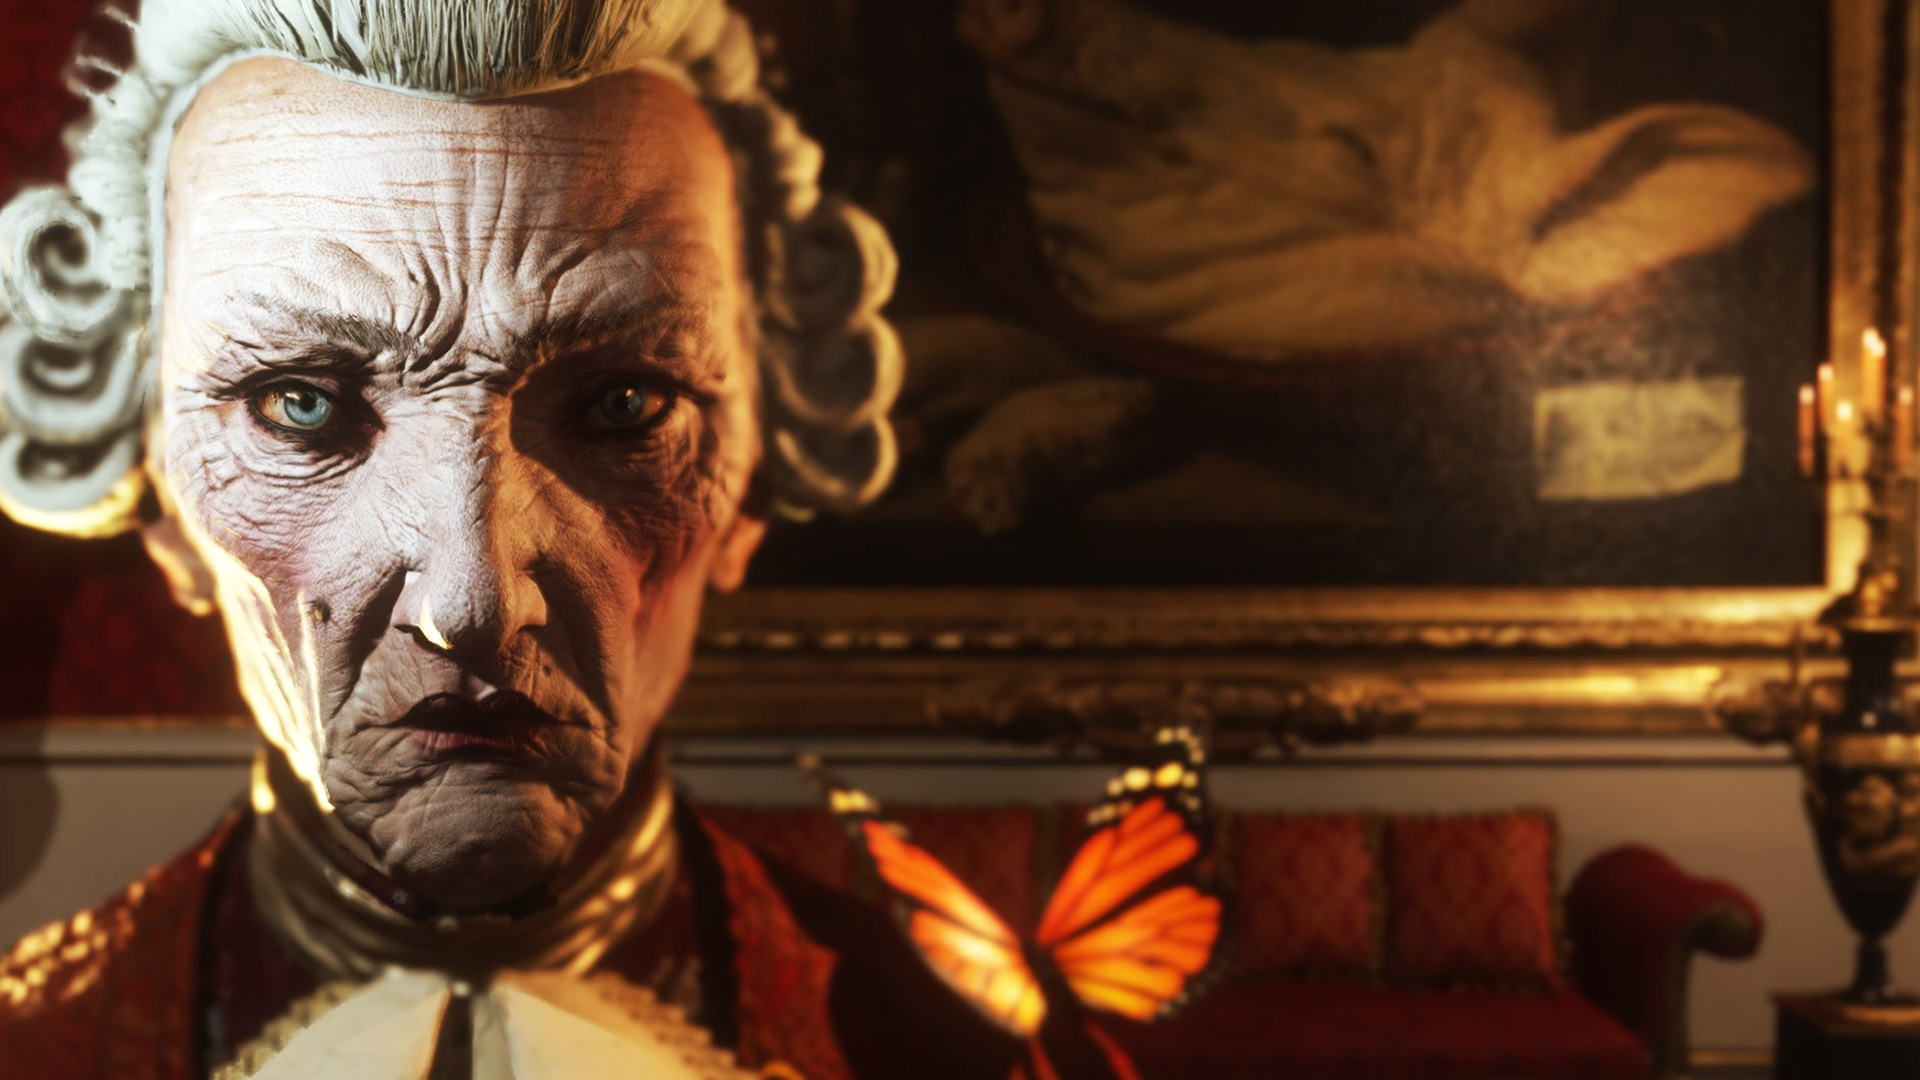 steam the council download